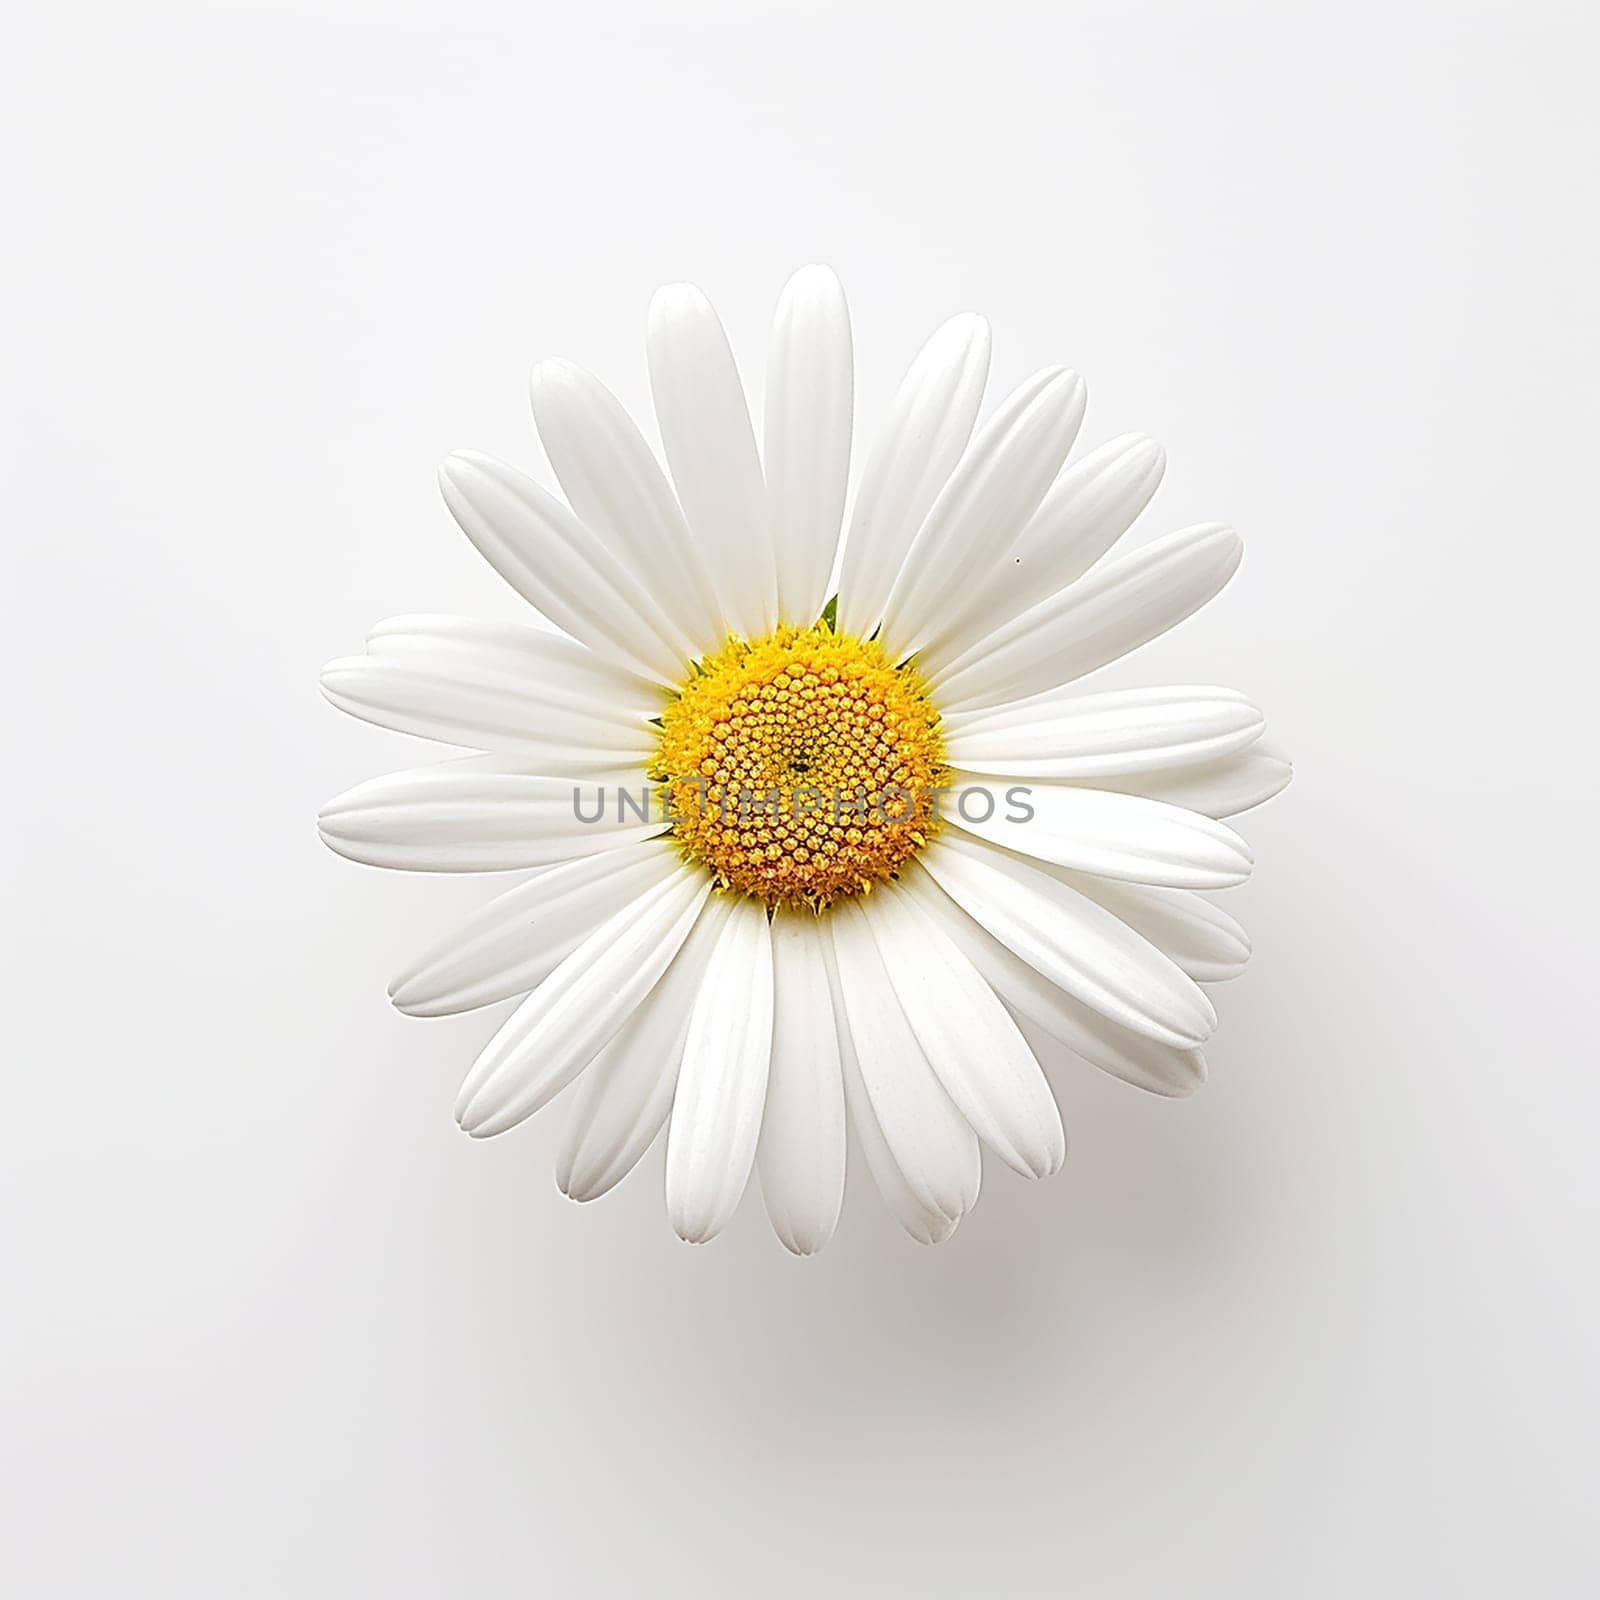 Close-up of a single white daisy against a plain background.